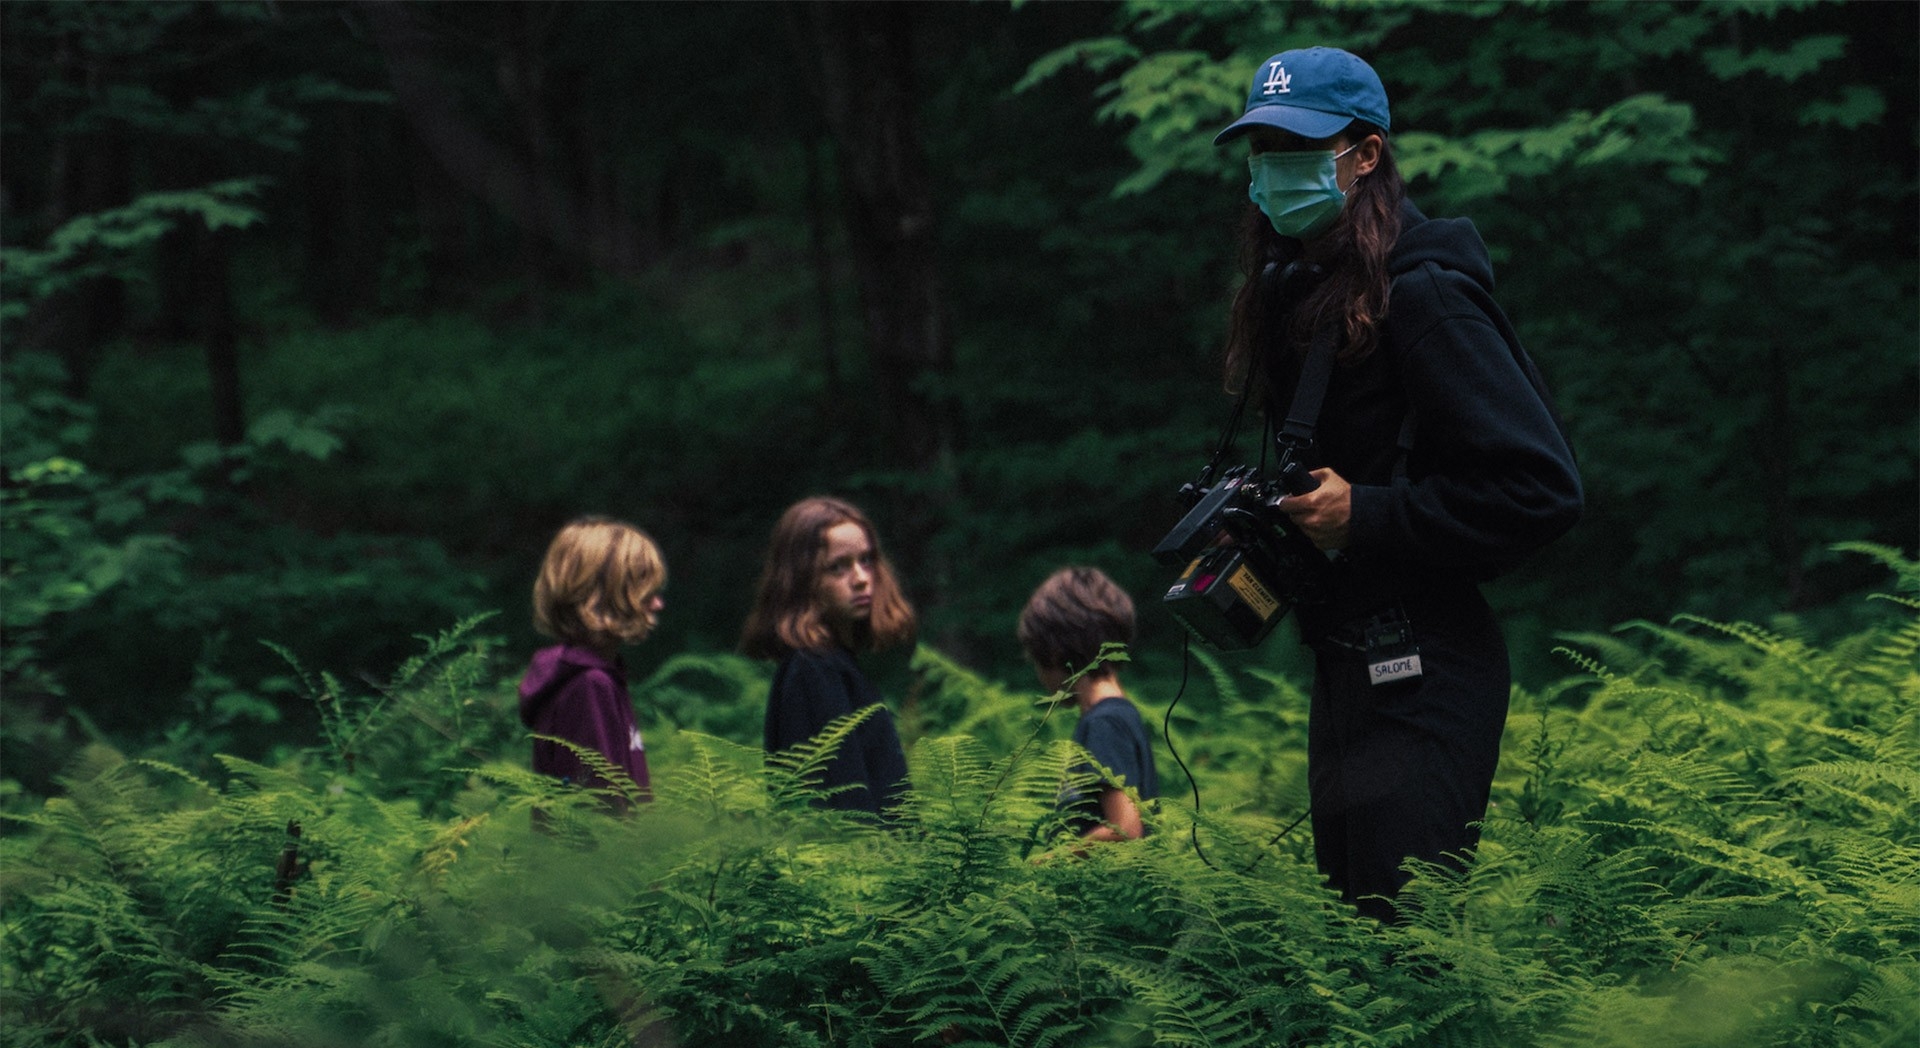 Salomé Villeneuve stands in a field of tall green grass wearing a baseball cap and a surgical mask. She holds a film camera in her hands and to her left are three small children